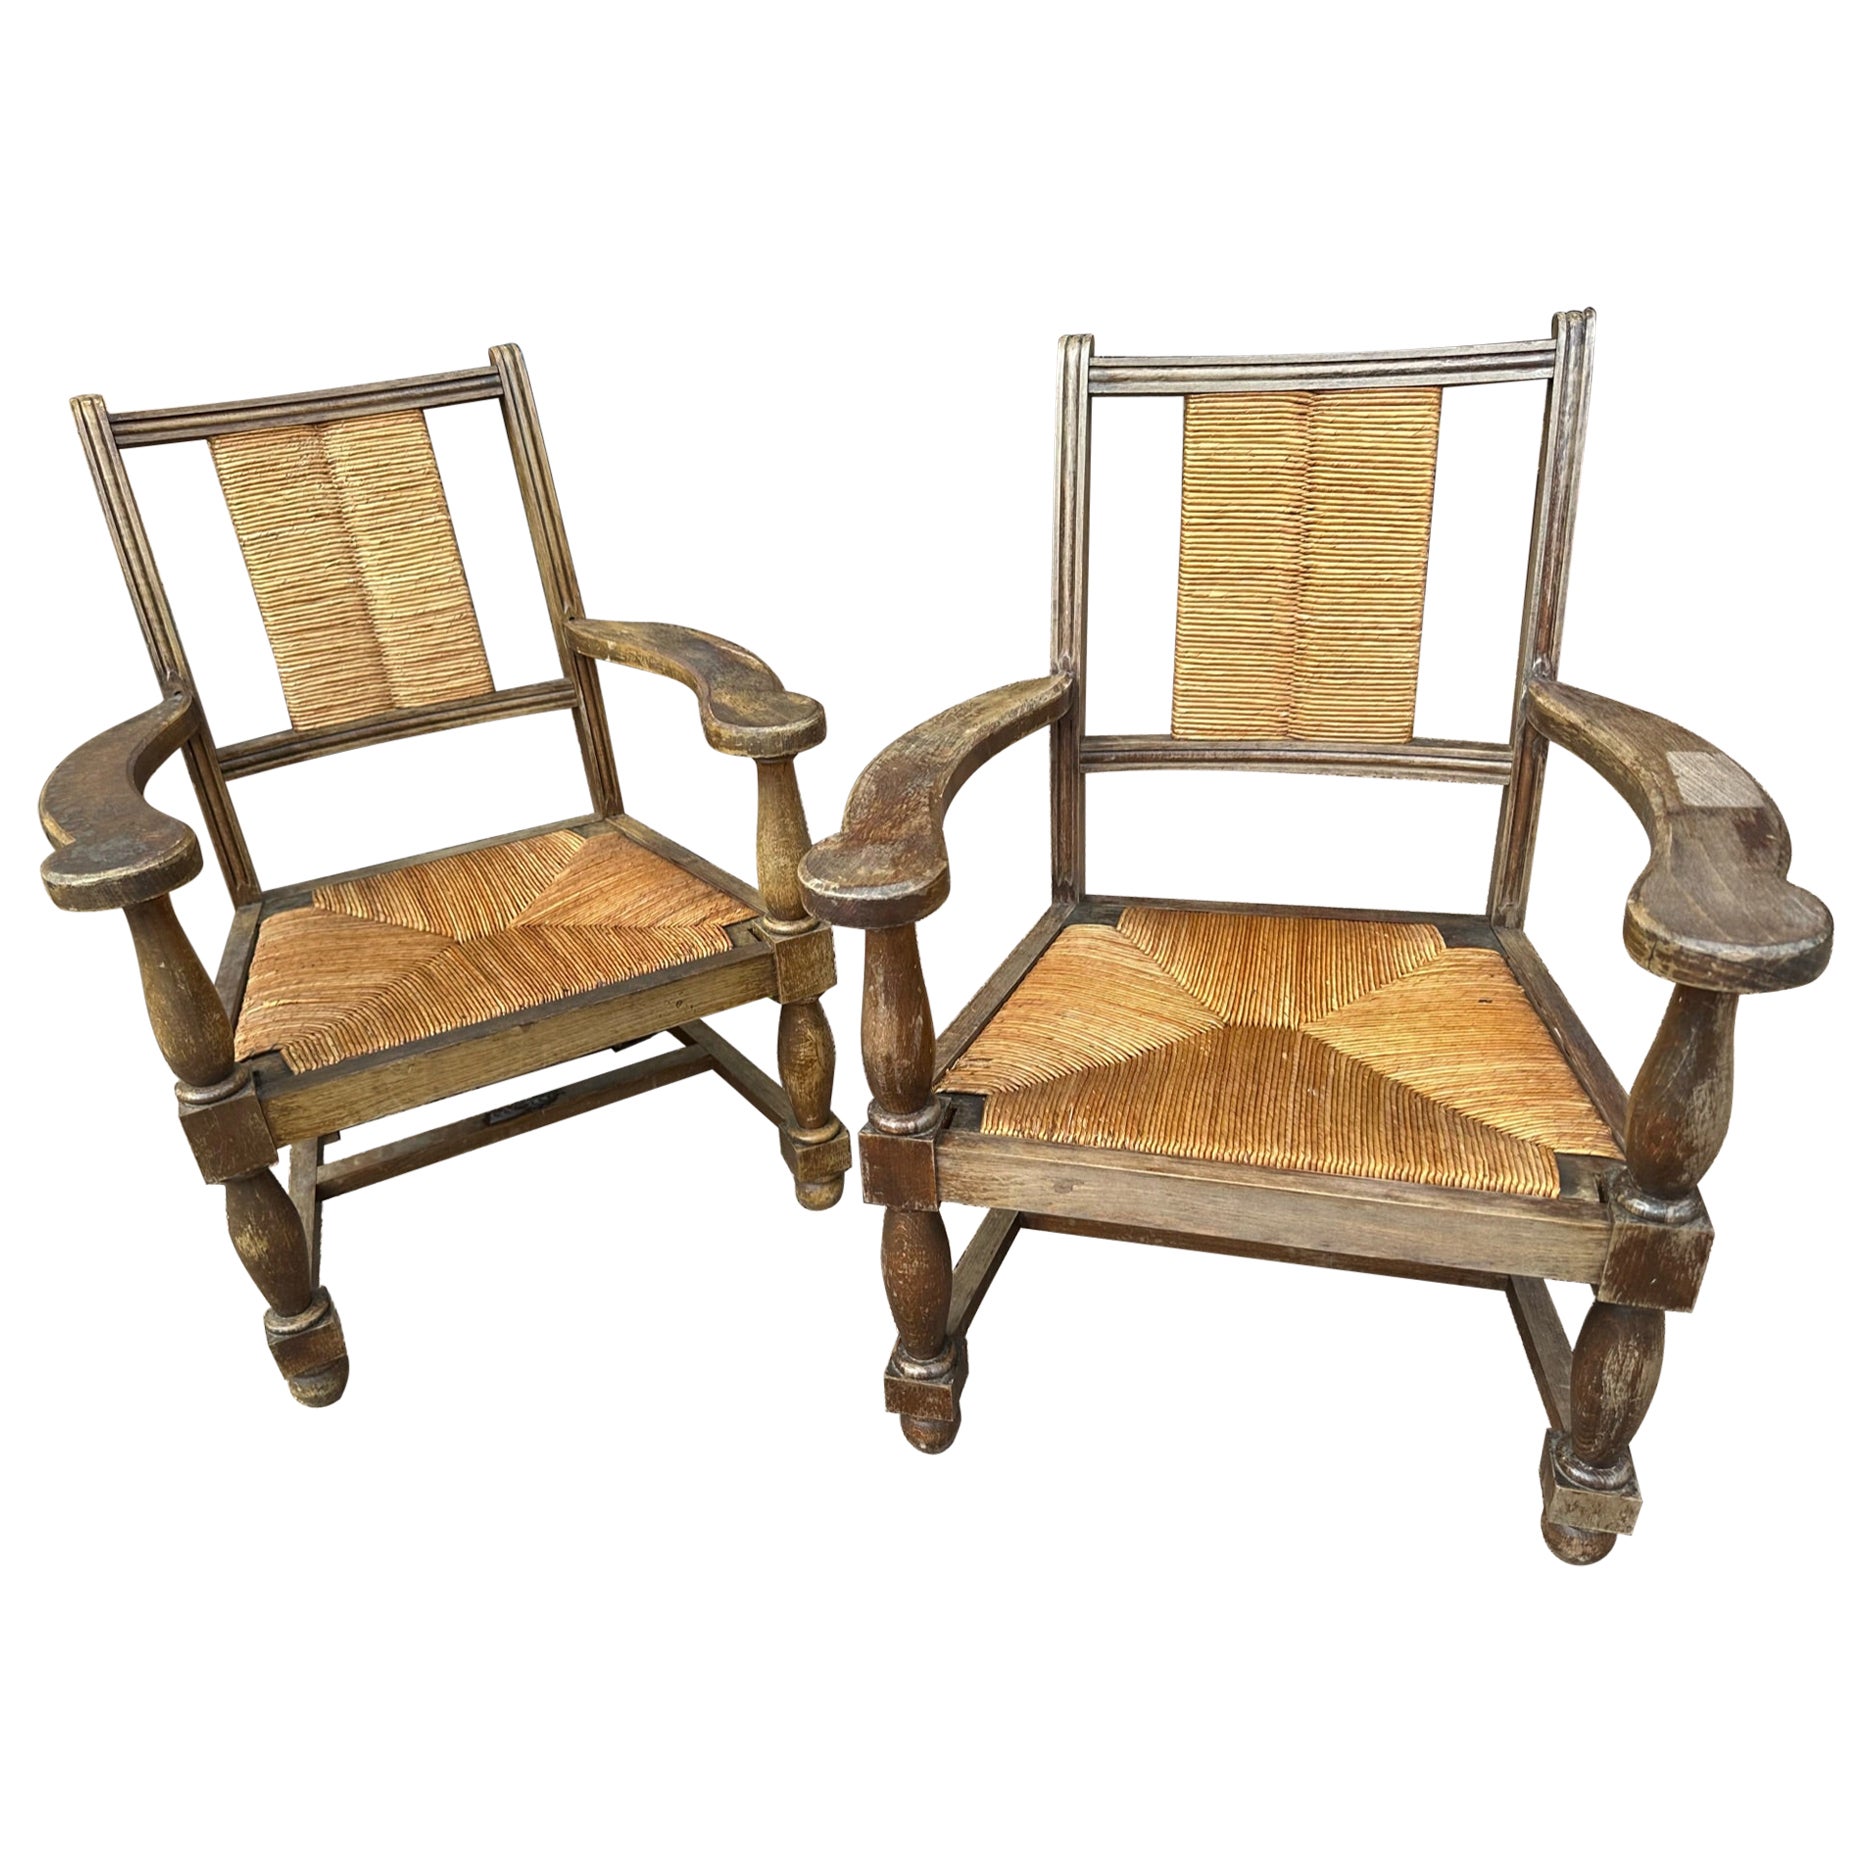 Pair of wood structure chairs with woven rush seat and back. Antique condition, wear is consistent with age, circa 1950s.